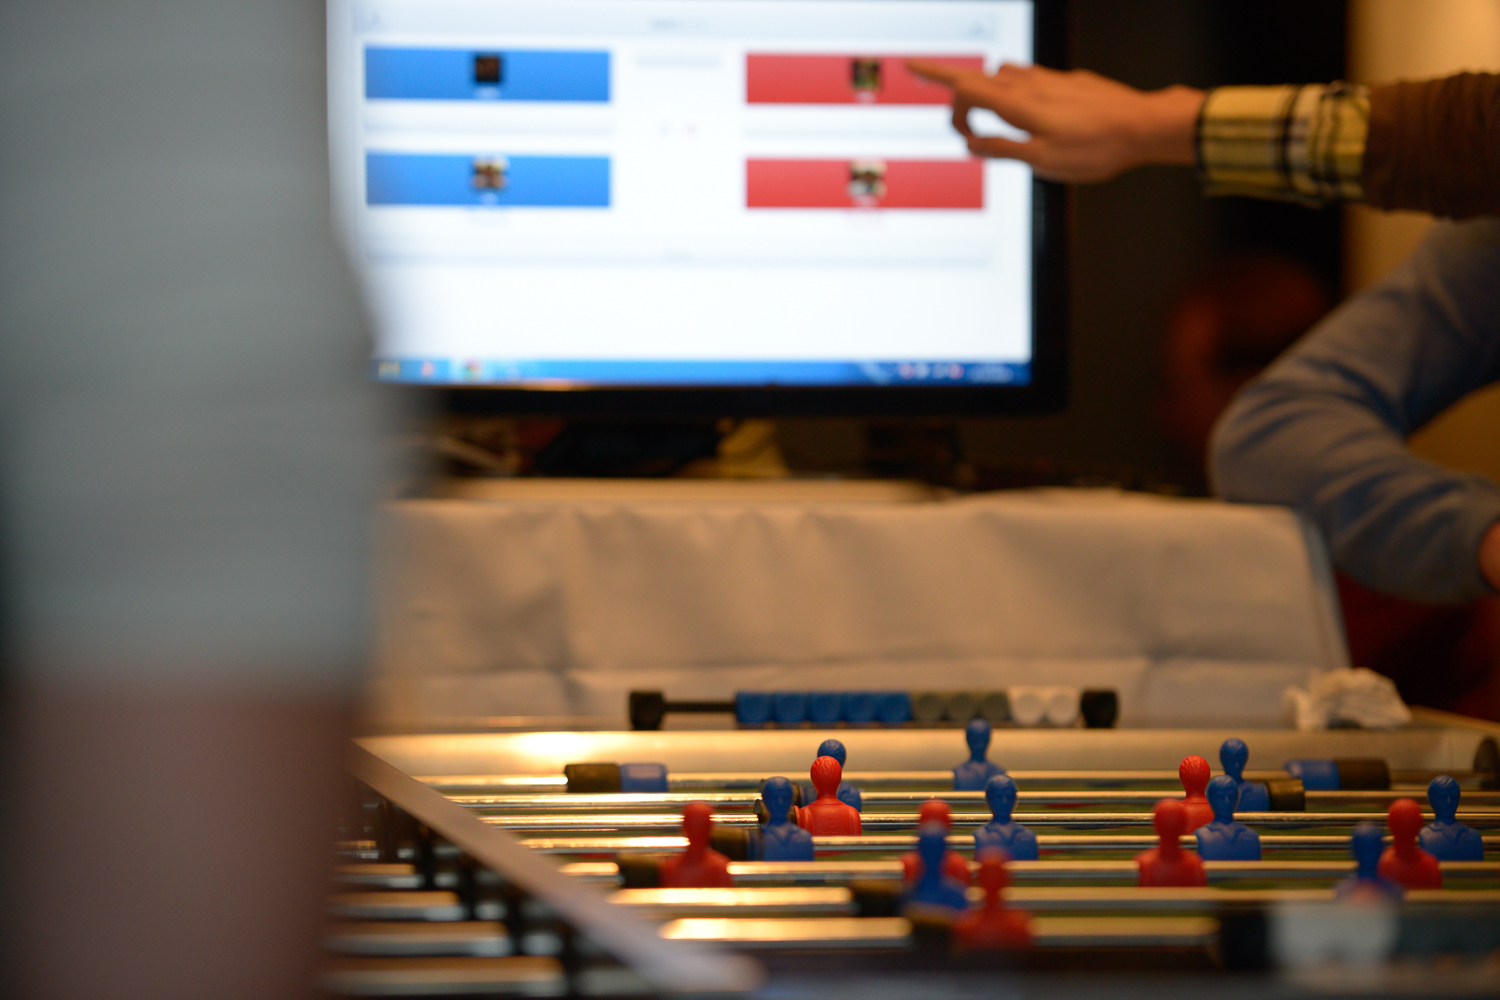 Daniel, Senior Software Engineer at Netcetera, programmed a table football app in his spare time that ranks the players and displays the score.